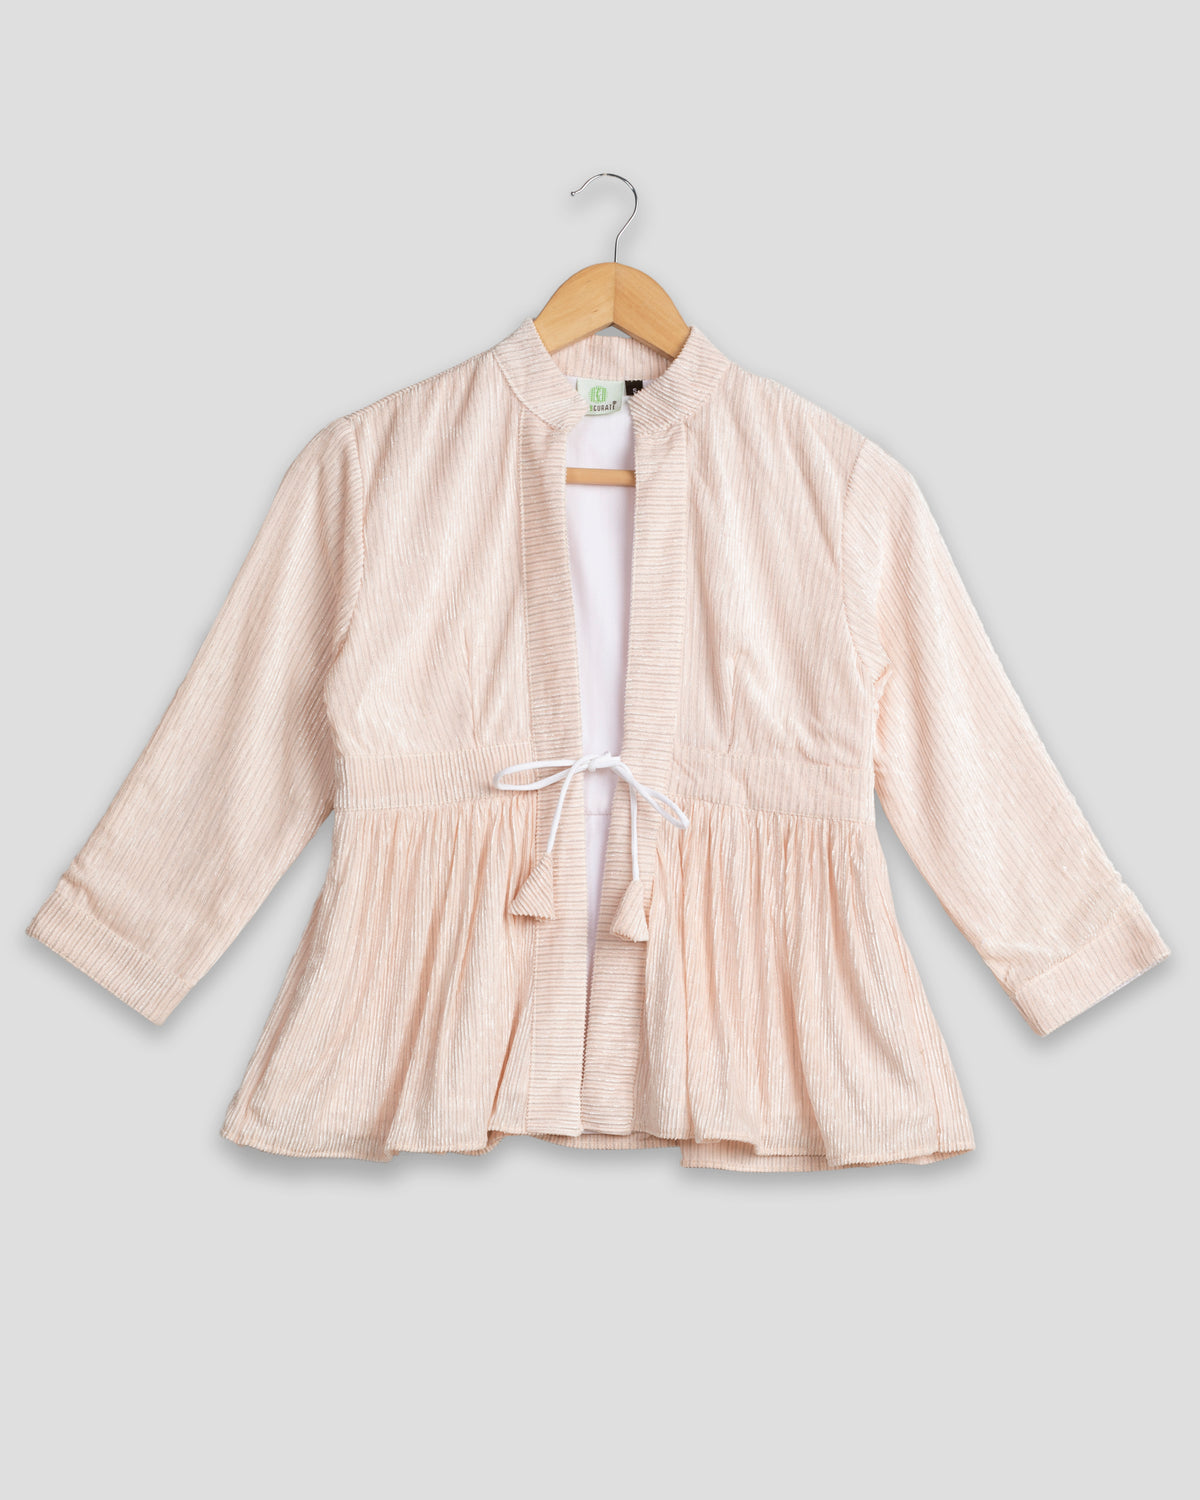 Luxurious Imported Jacket For Women